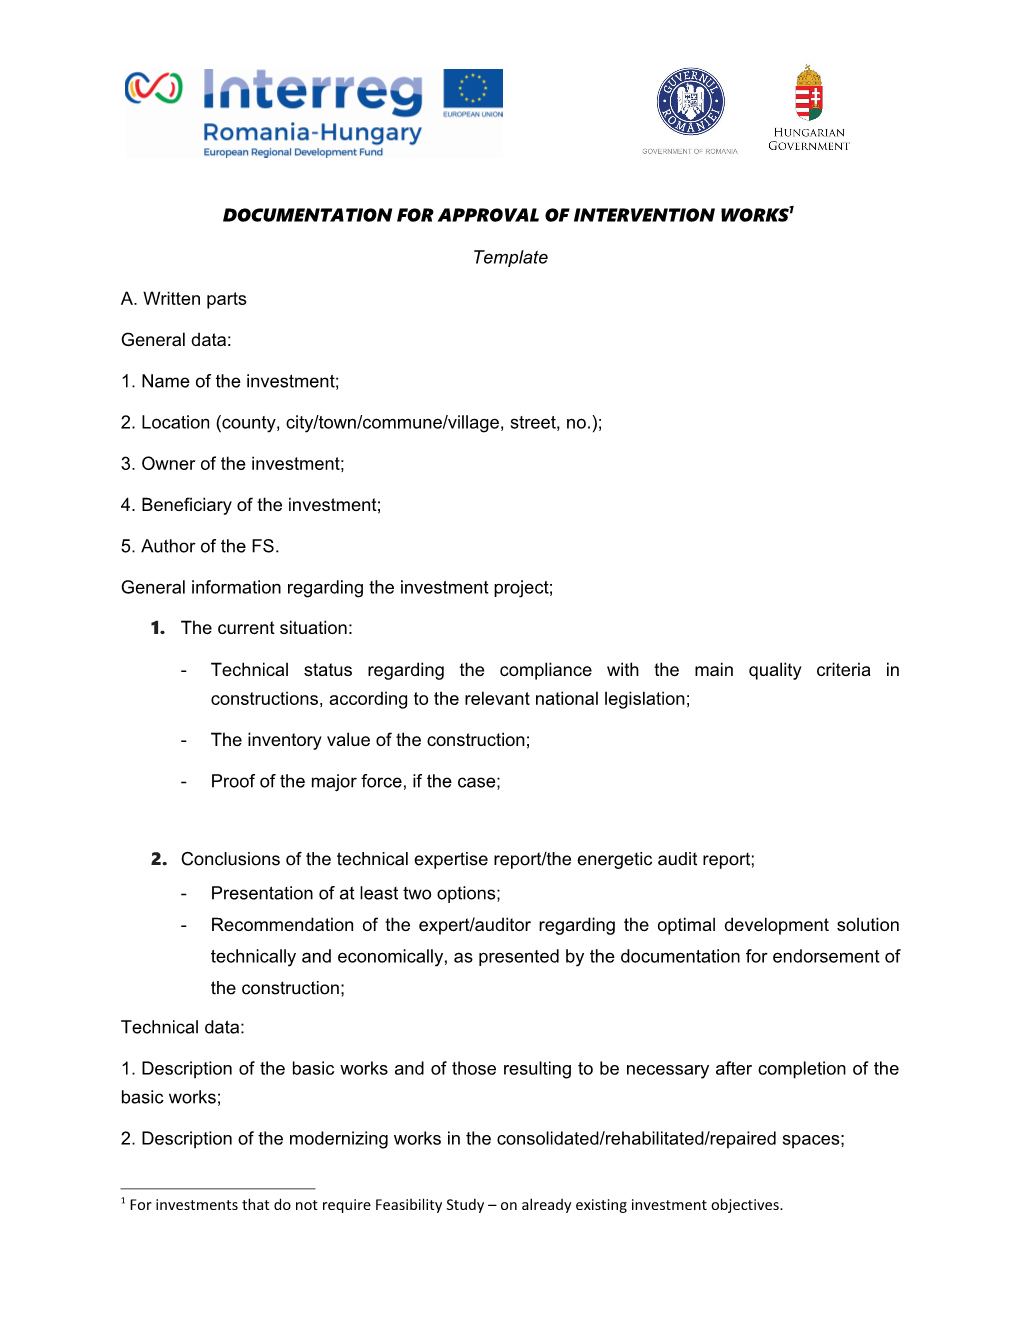 Documentation for Approval of Intervention Works 1